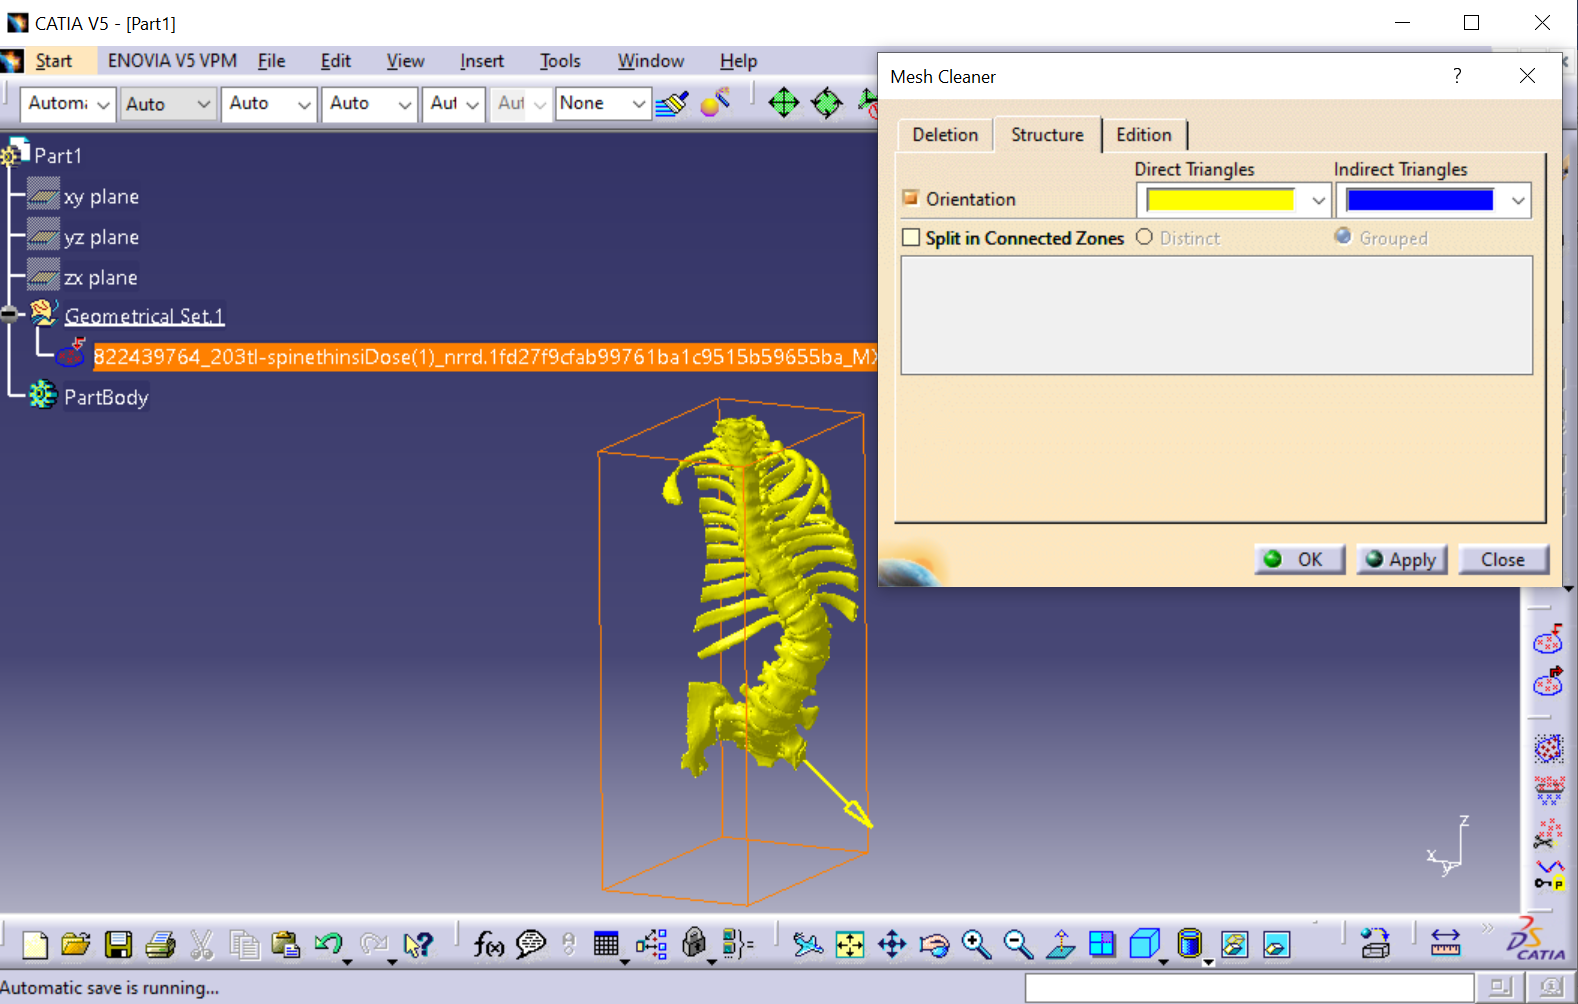 The process of removing corrupt meshes from the STL file in CATIA V5